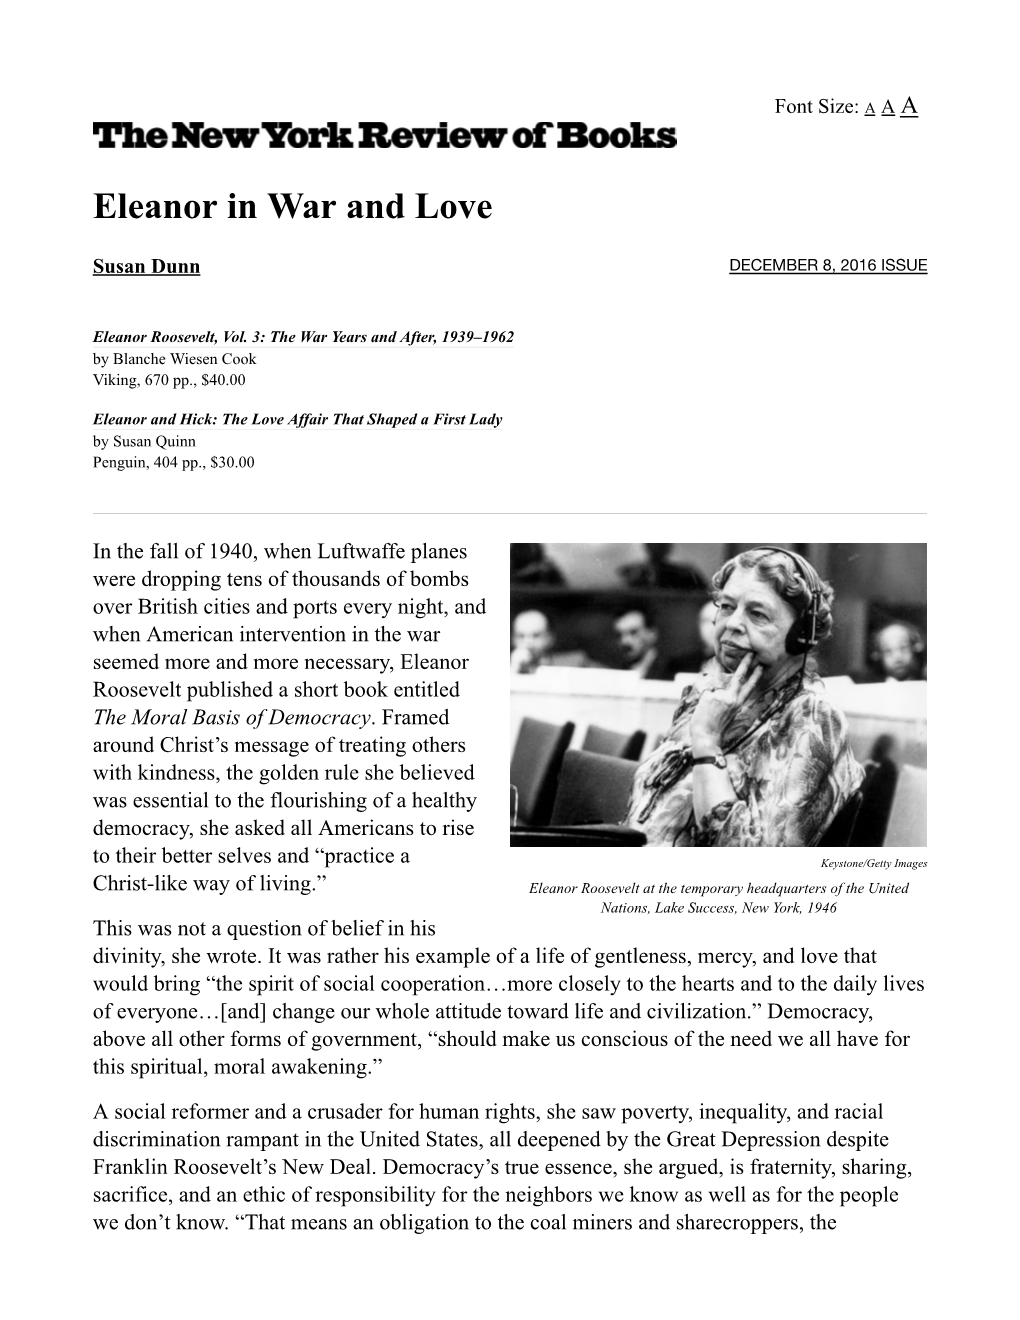 Eleanor in War and Love